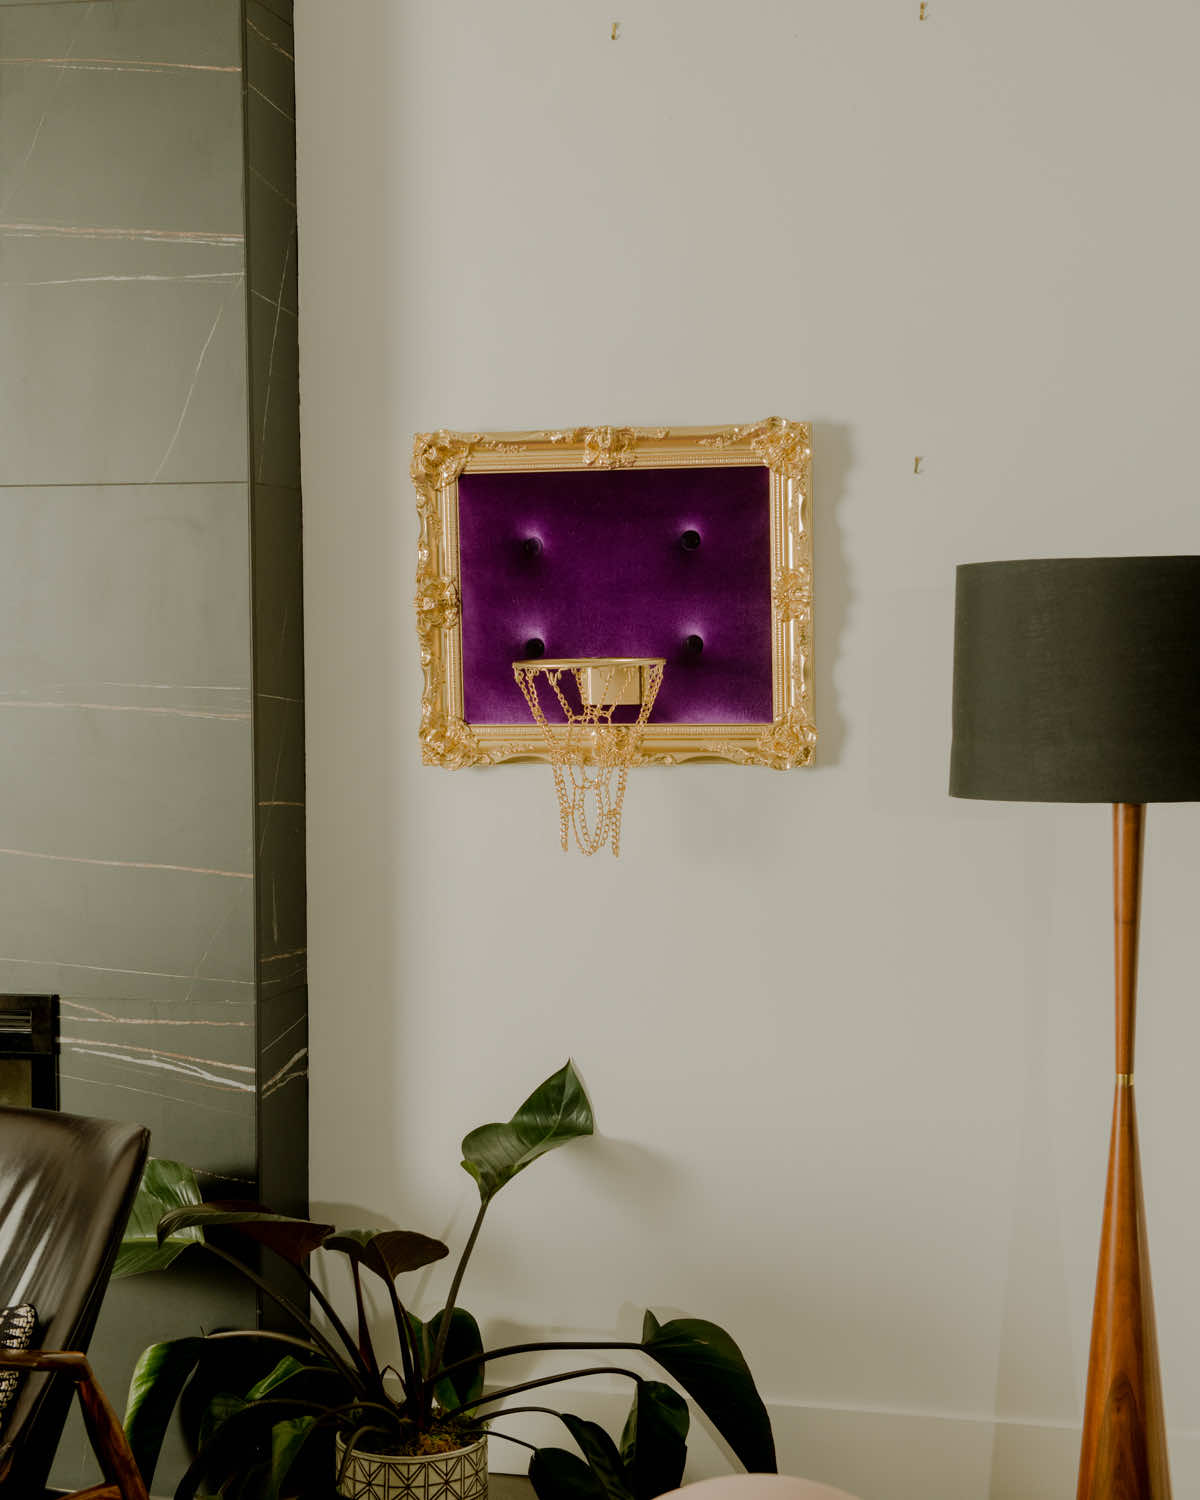 A purple basketball hoop on the wall of a living room.